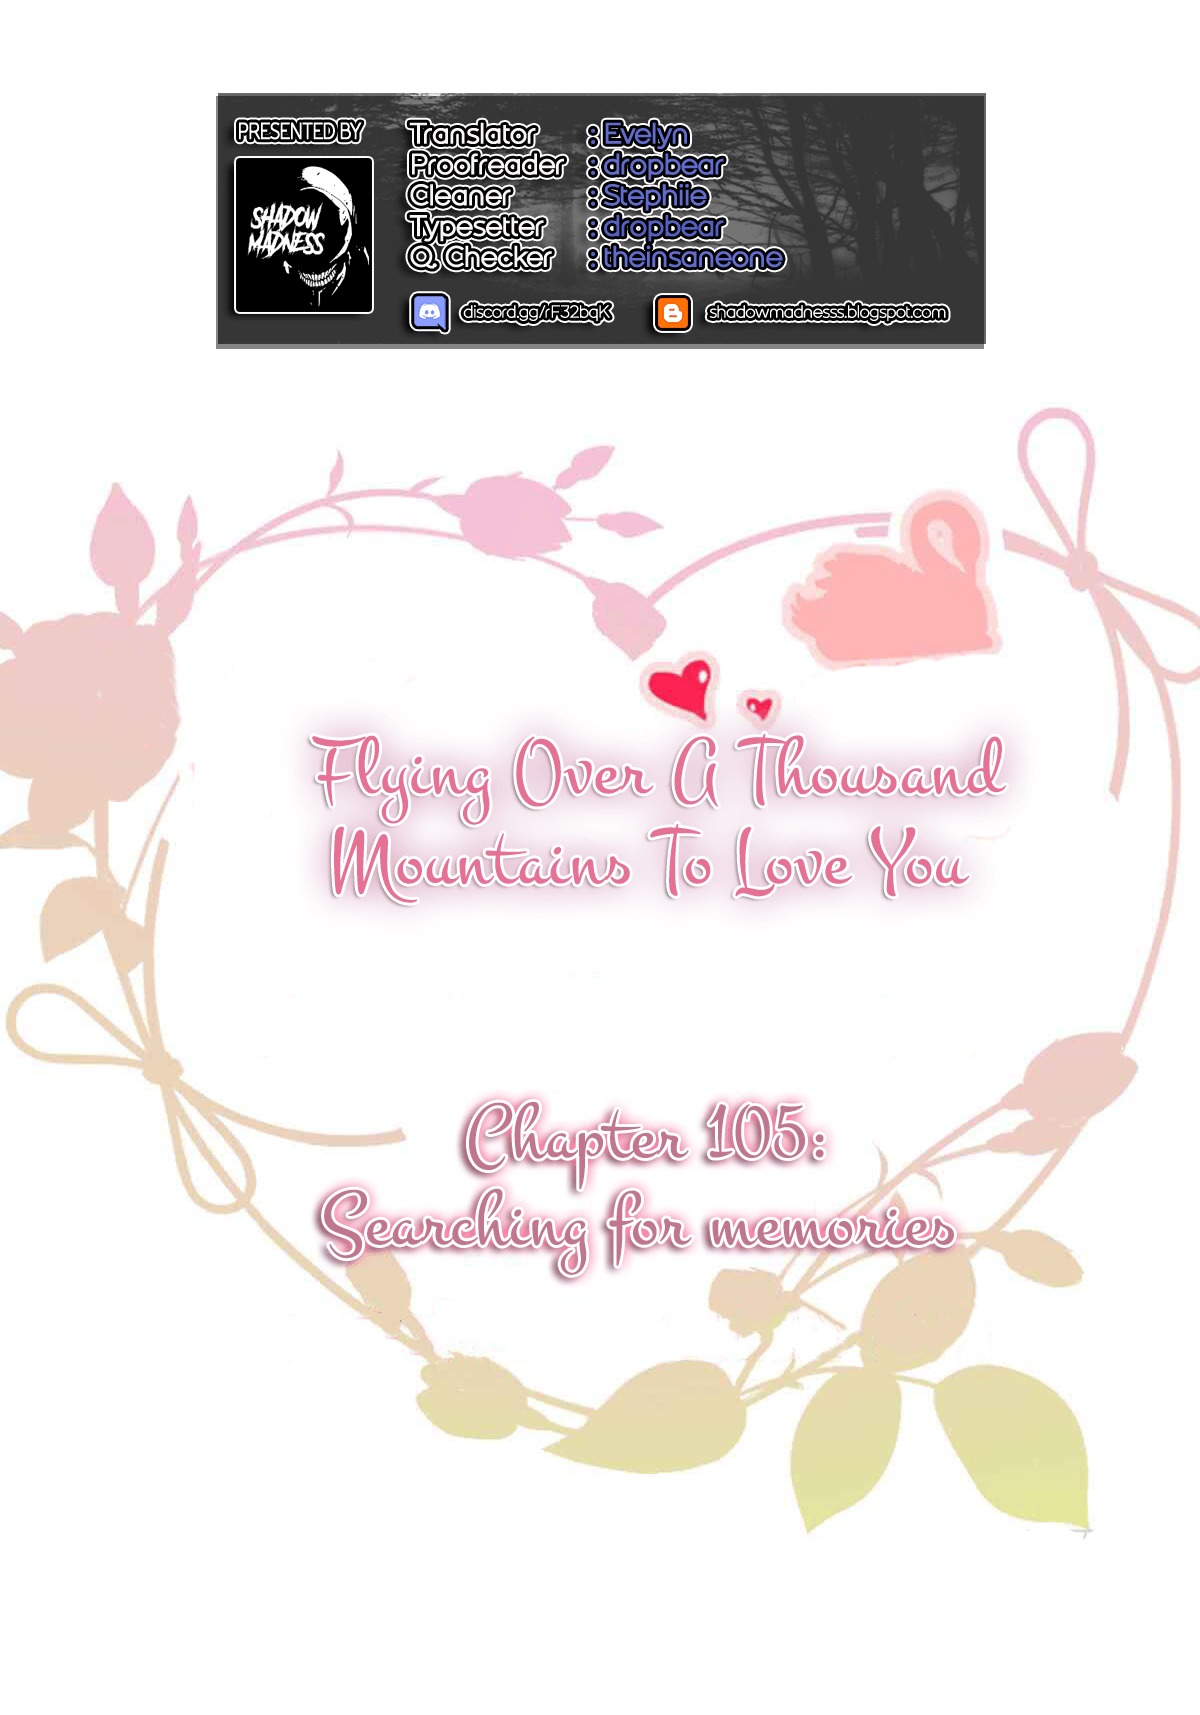 Flying Over a Thousand Mountains to Love You ch.105